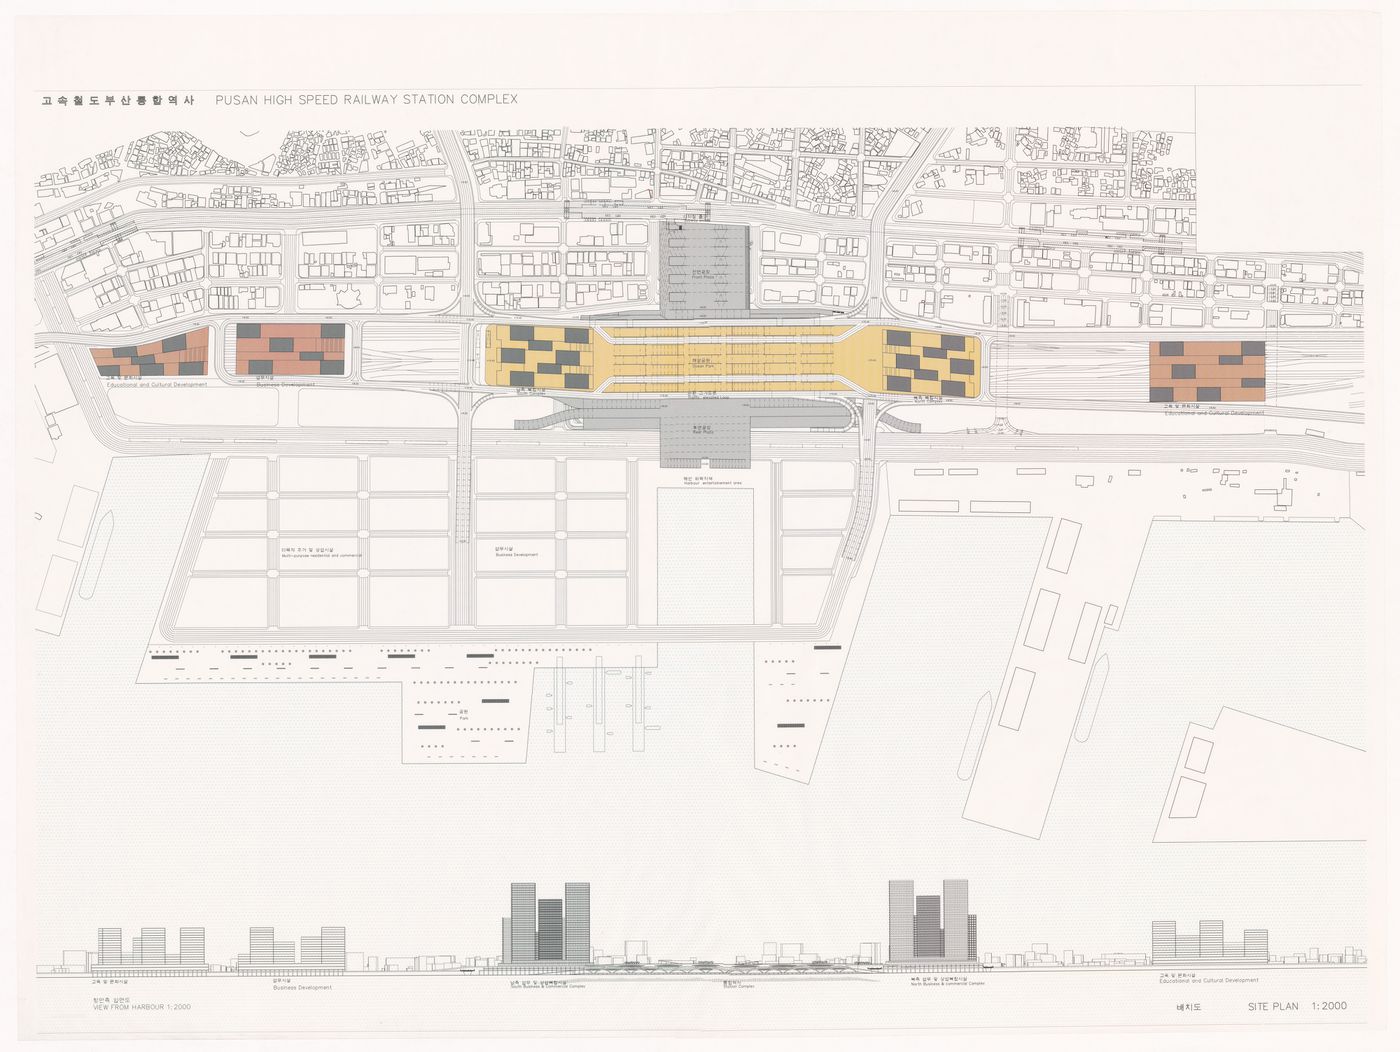 Site plan with elevations for High-Speed Railway Complex, Busan, South Korea